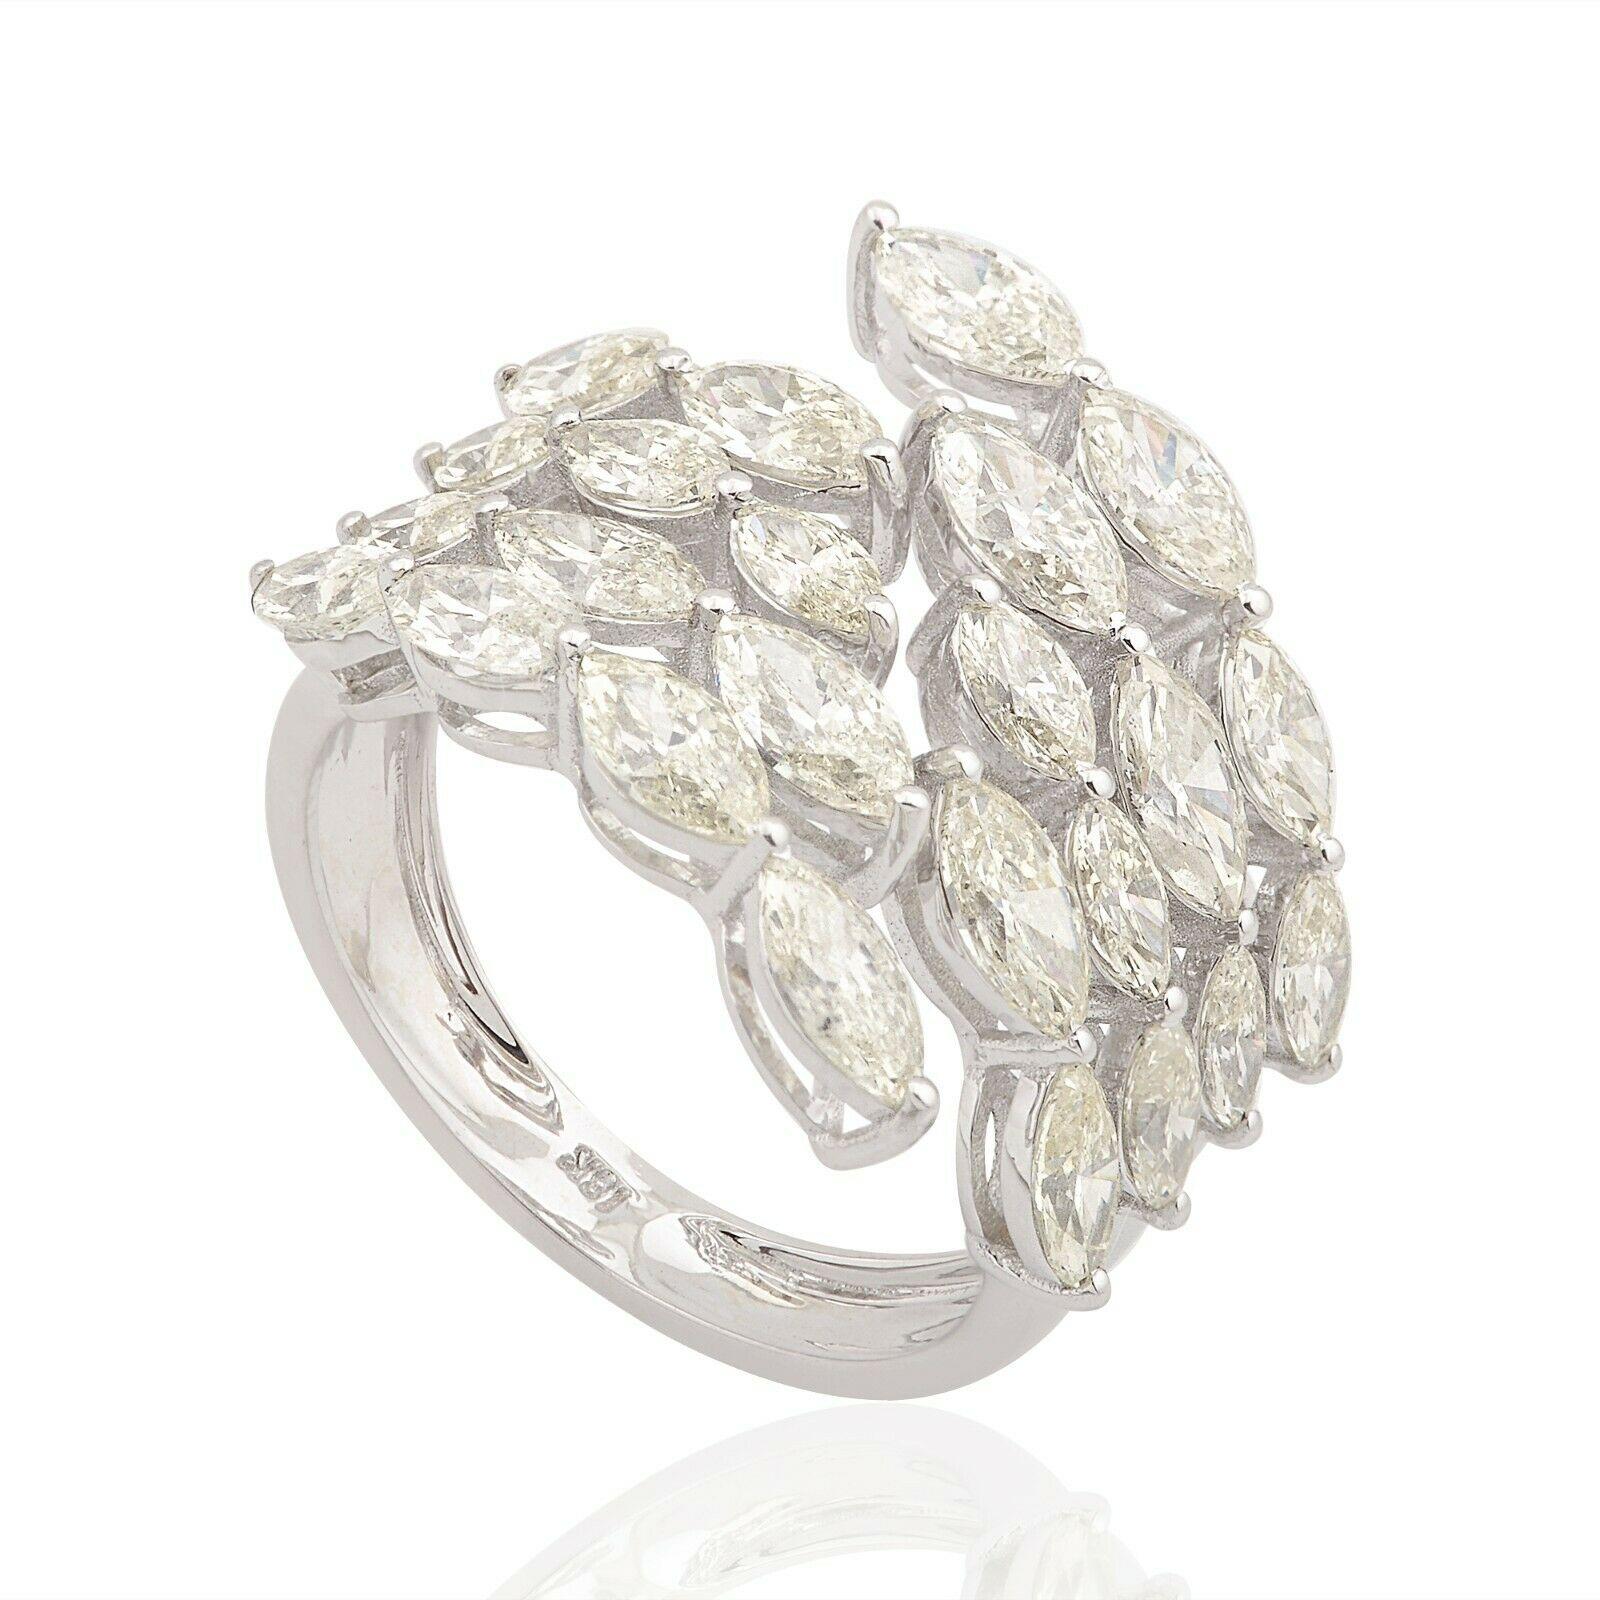 This ring has been meticulously crafted from 14-karat gold and set with 3.80 carats of sparkling marquise diamonds. Available in Rose, Yellow and White Gold

The ring is a size 7 and may be resized to larger or smaller upon request. 
FOLLOW  MEGHNA